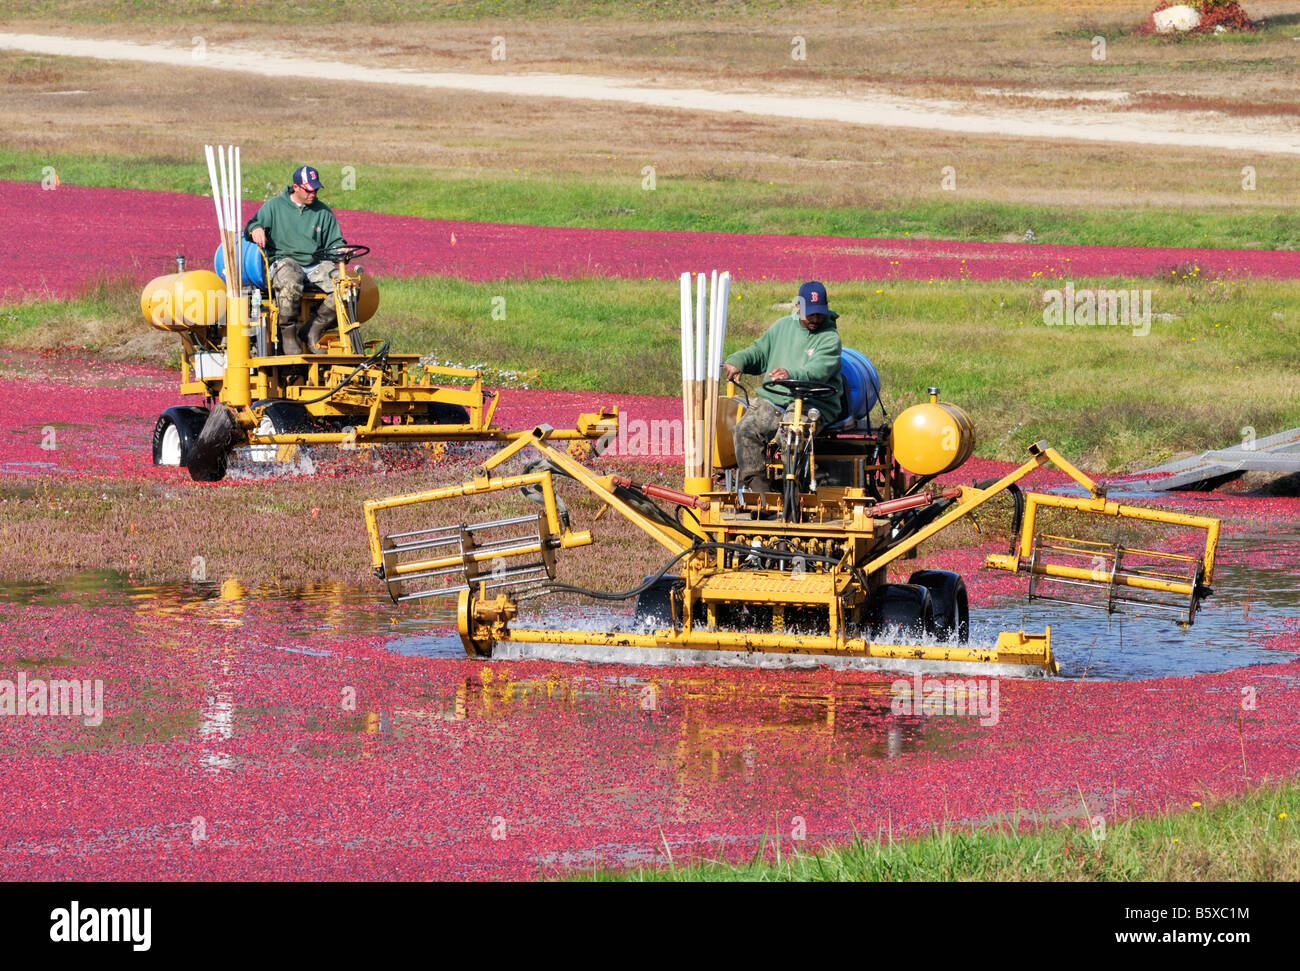 2 men on harvesting machines in flooded cranberry bog in New England in autumn Stock Photo